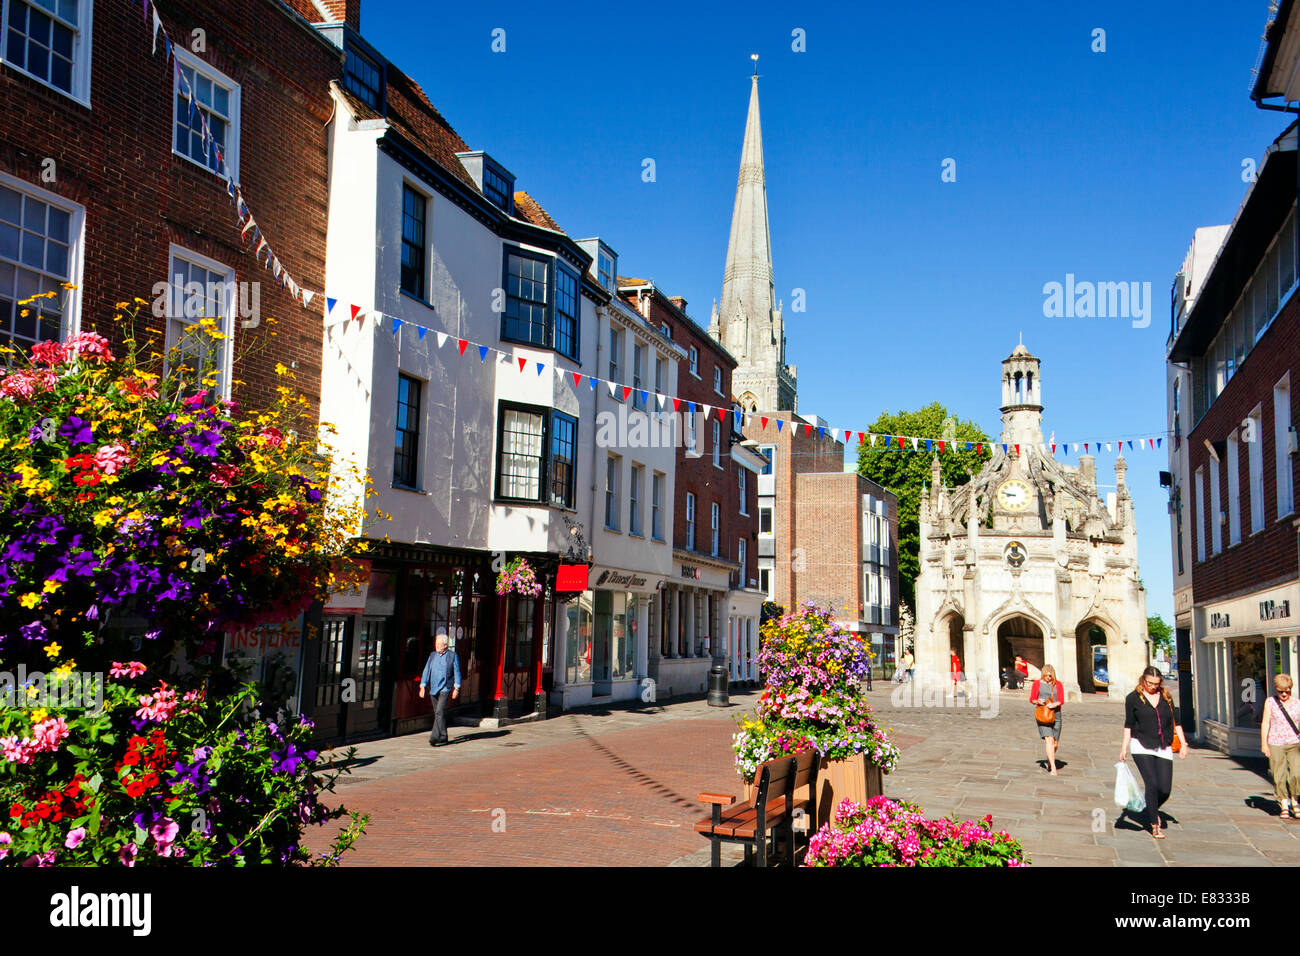 Chichester England Hotels